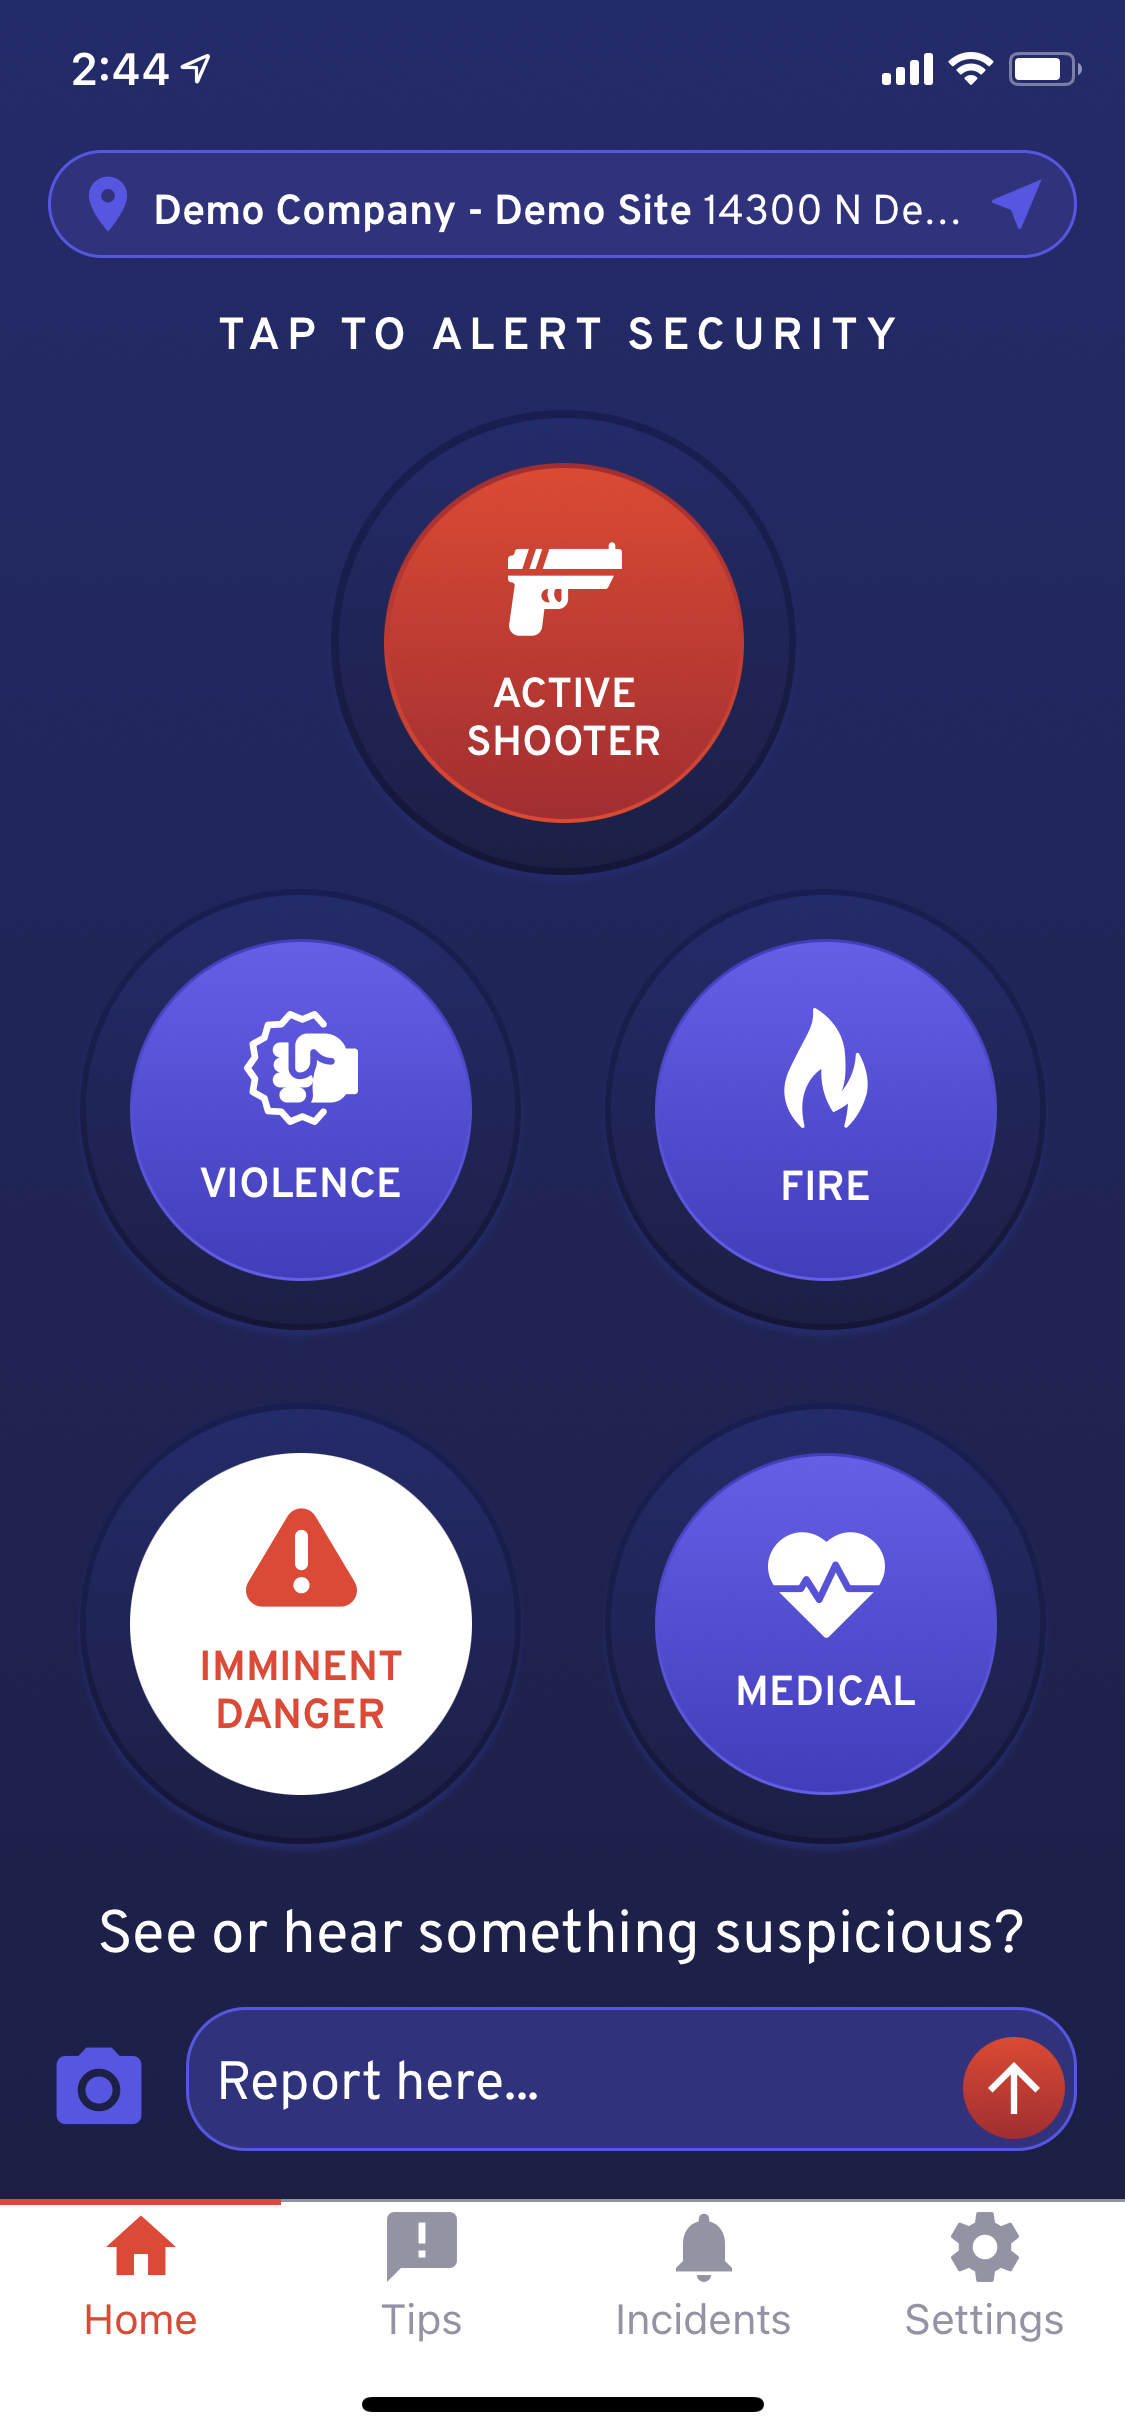 Defendry SeeSay App - Panic Buttons, Anonymous Tip Reporting, & Mass Emergency Notifications